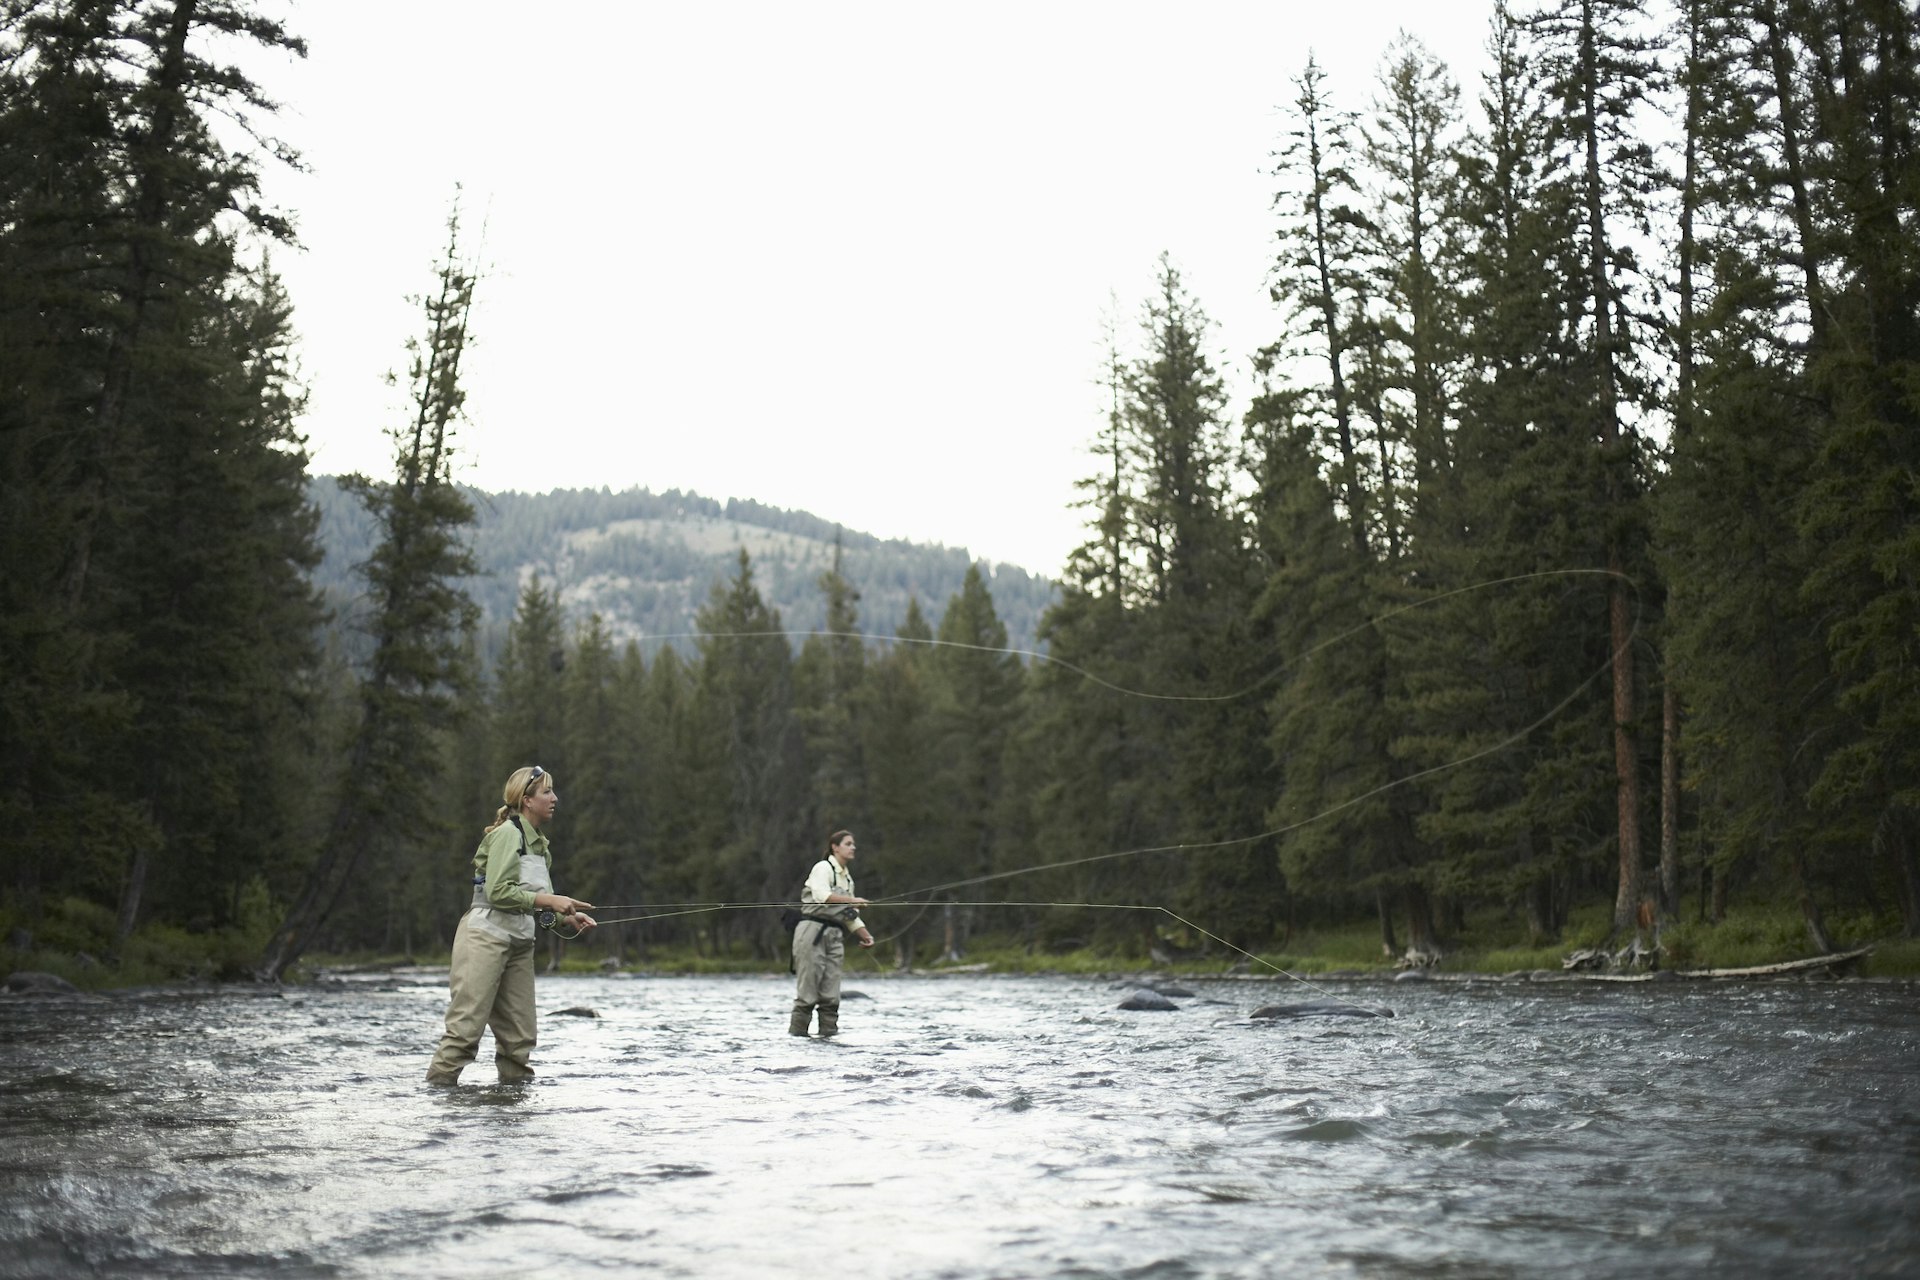 Two anglers in waders cast off as they fly-fish in a river